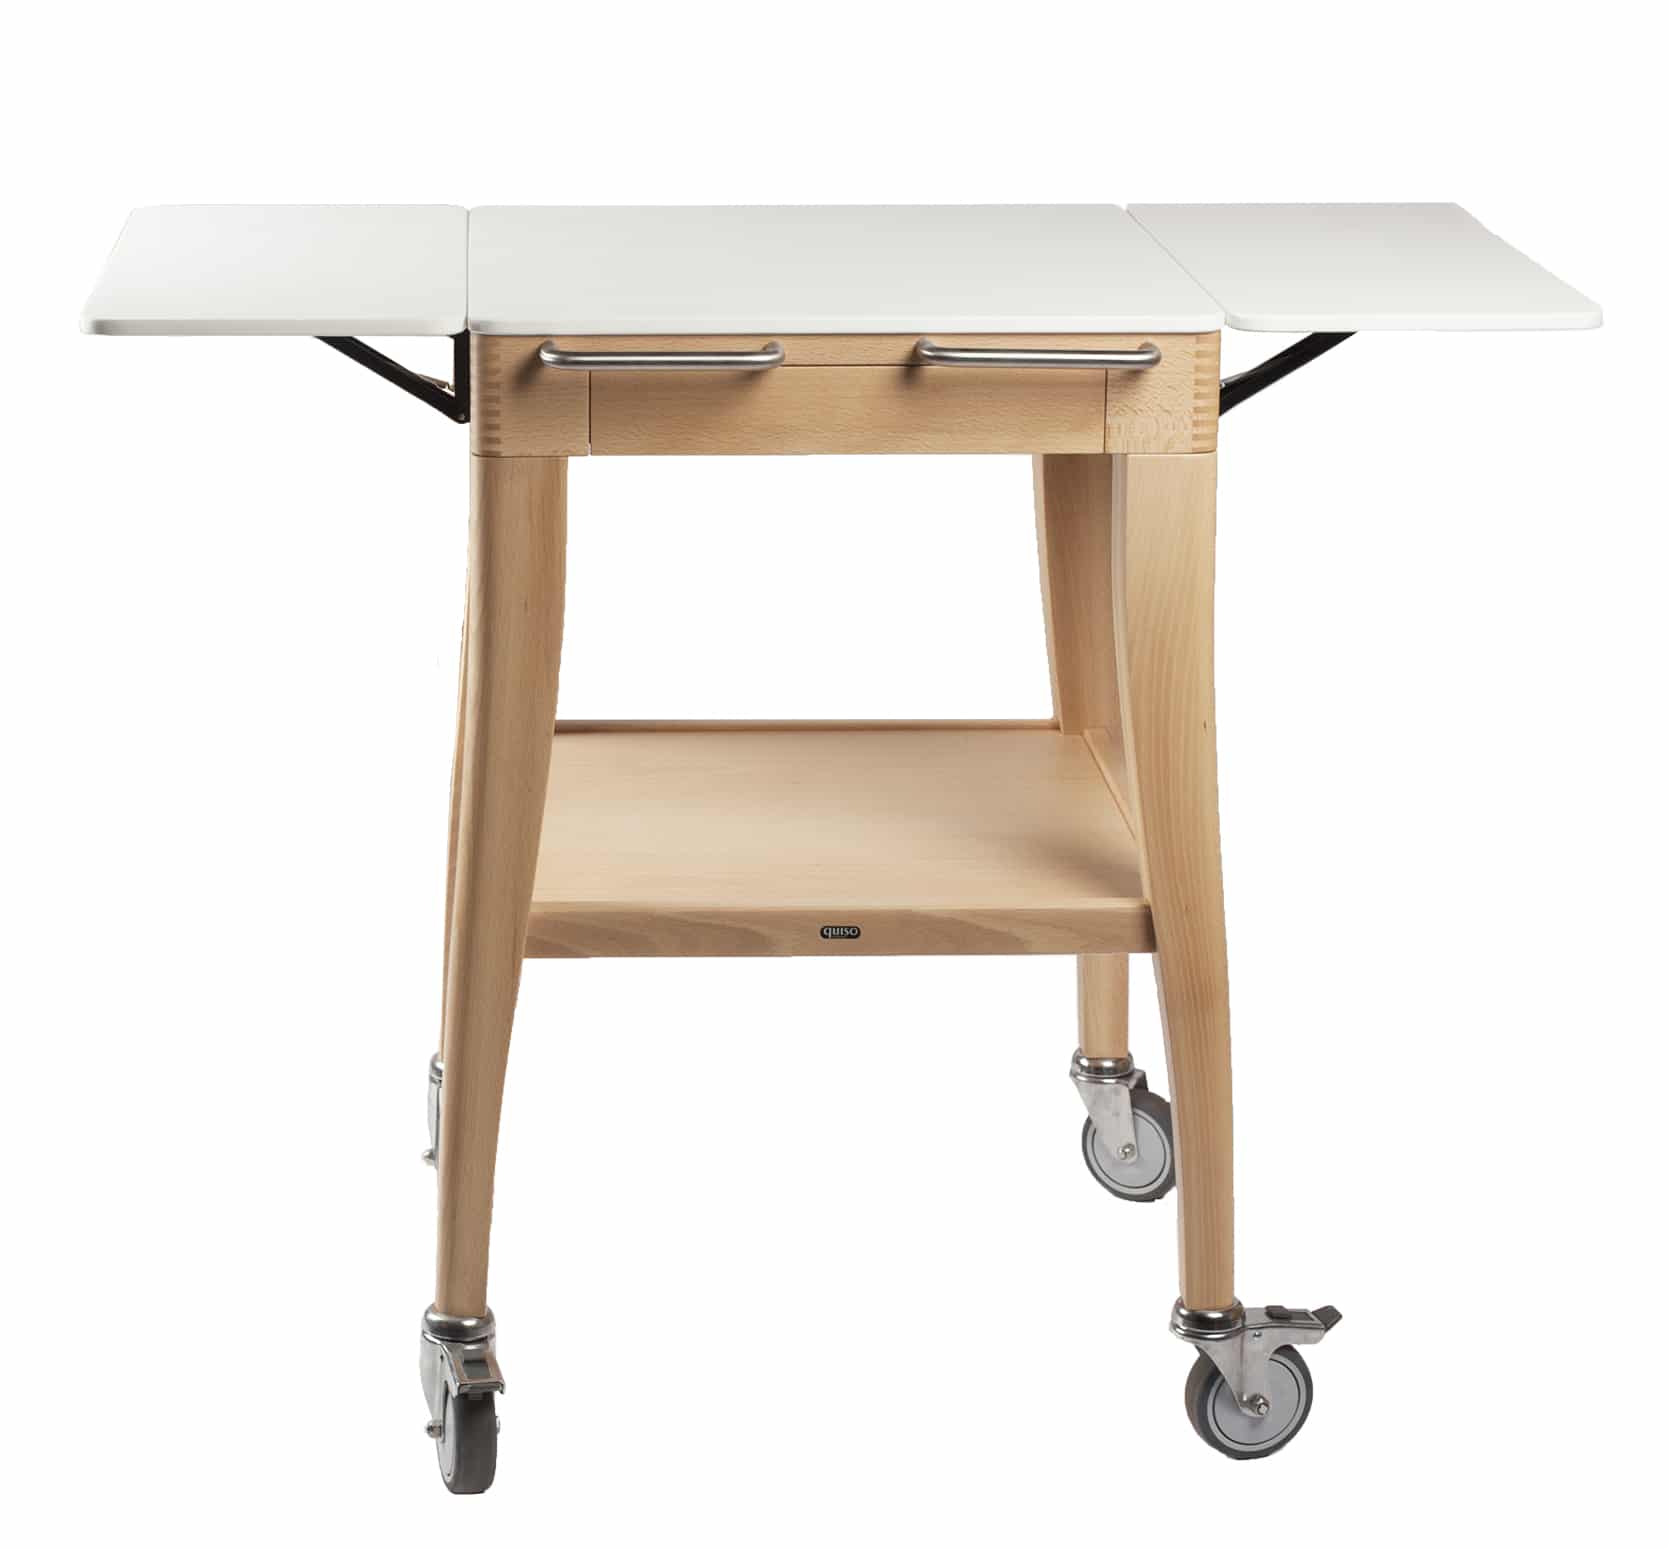 QUISO Km31 multifunctional trolley in natural beech and white Krion top